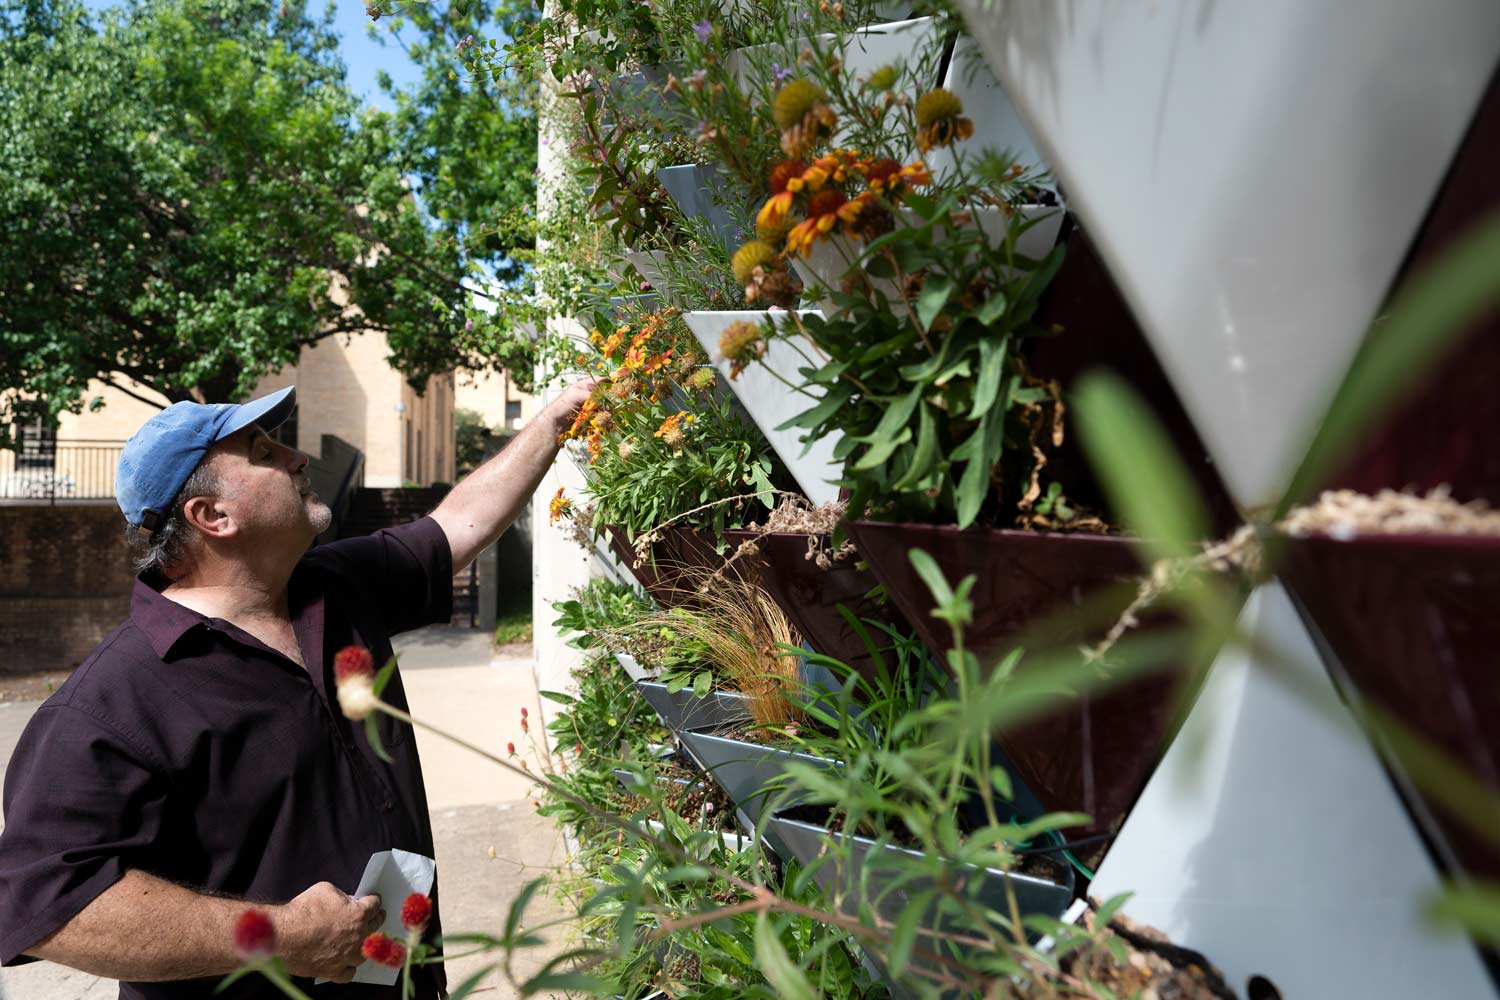 A faculty member inspects a potted plant that is part of an exterior wall made of potted plant containers